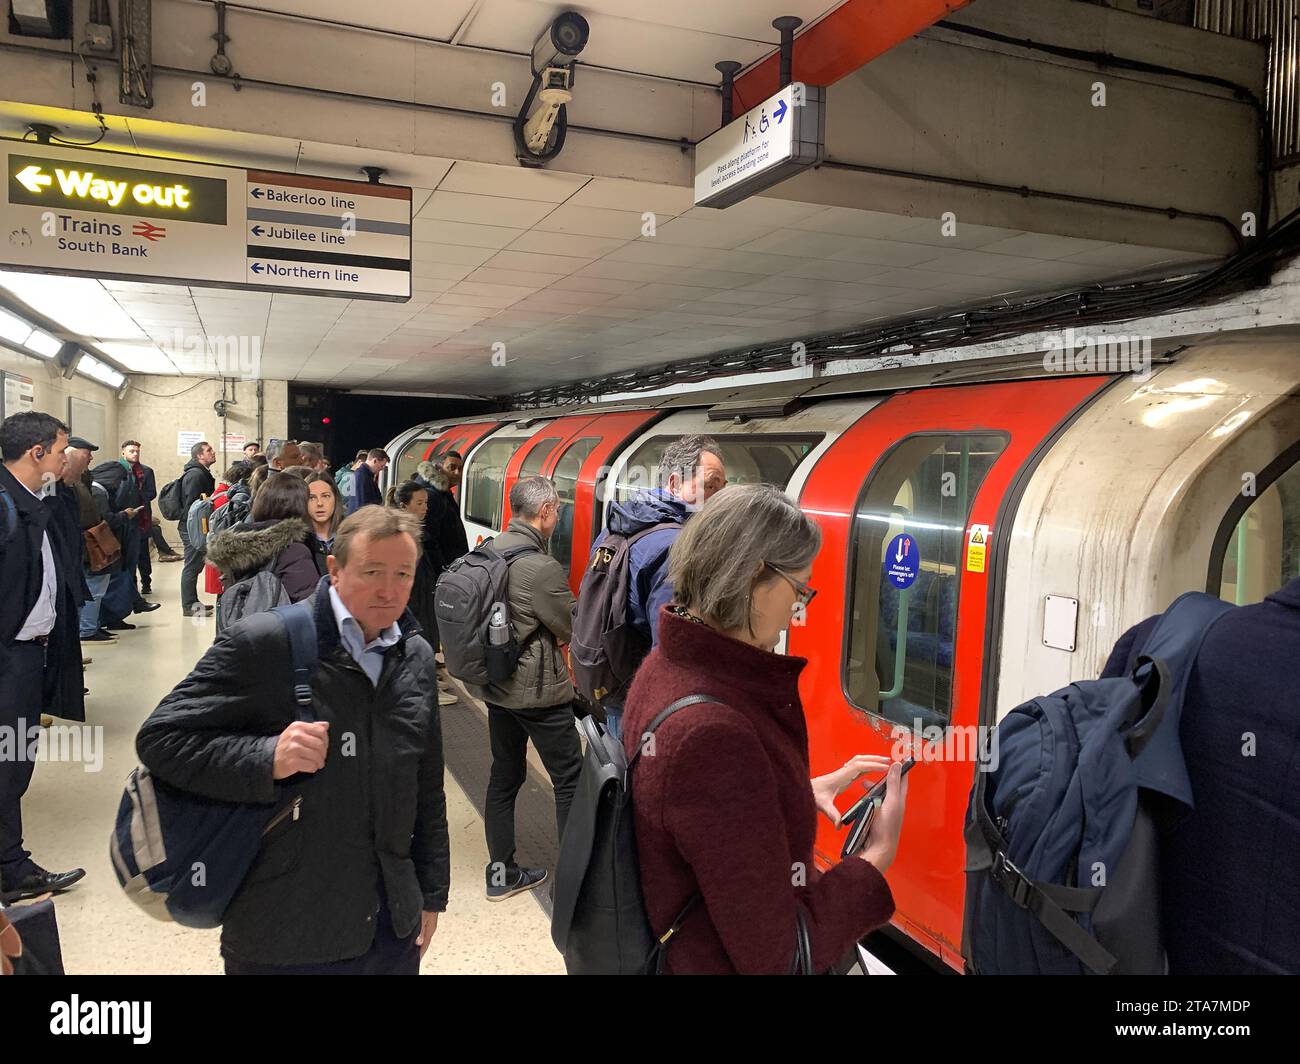 London, UK. 28th November, 2023. Commuters and passengers wait for a London Underground tube at Waterloo Railway Station in London to Bank Underground Station. The Waterloo & City train had to return to the depot causing passenger delays. Credit: Maureen McLean/Alamy Stock Photo